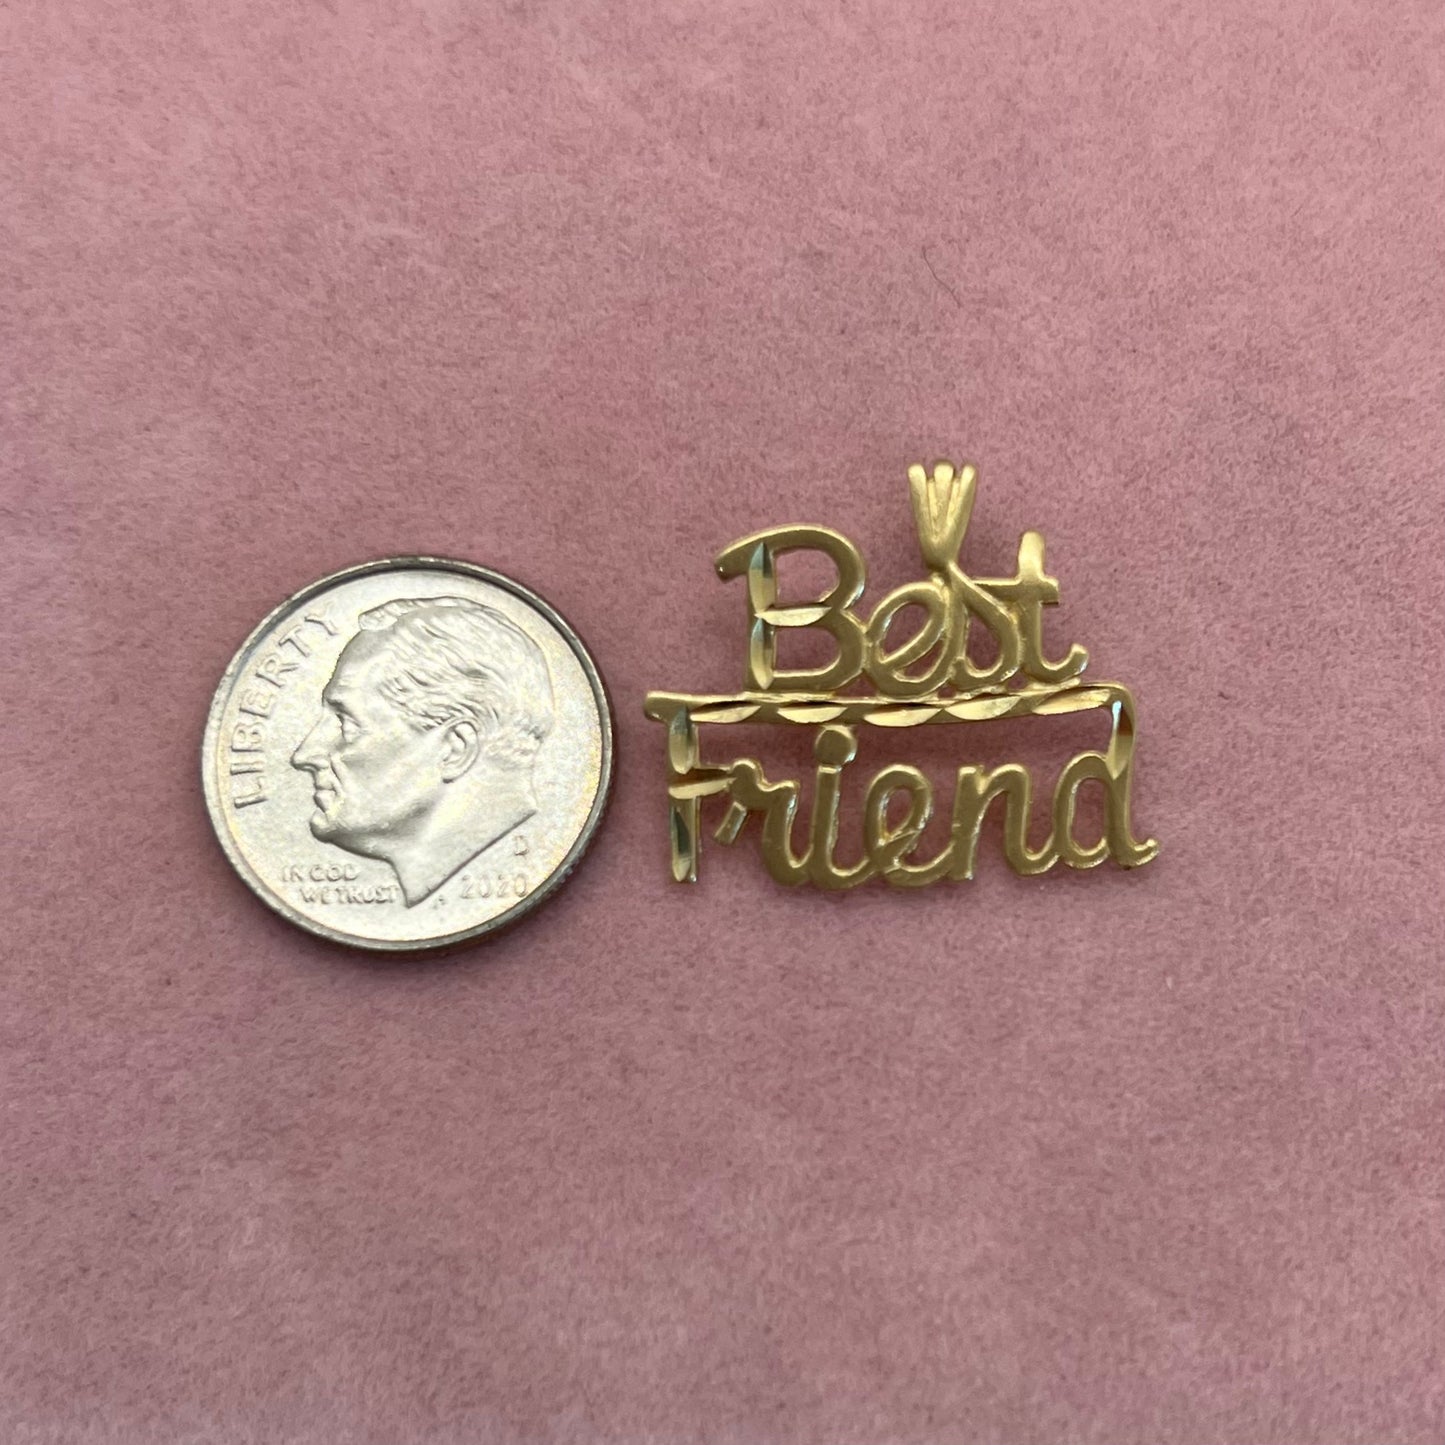 Best Friend Charm by Michael Anthony